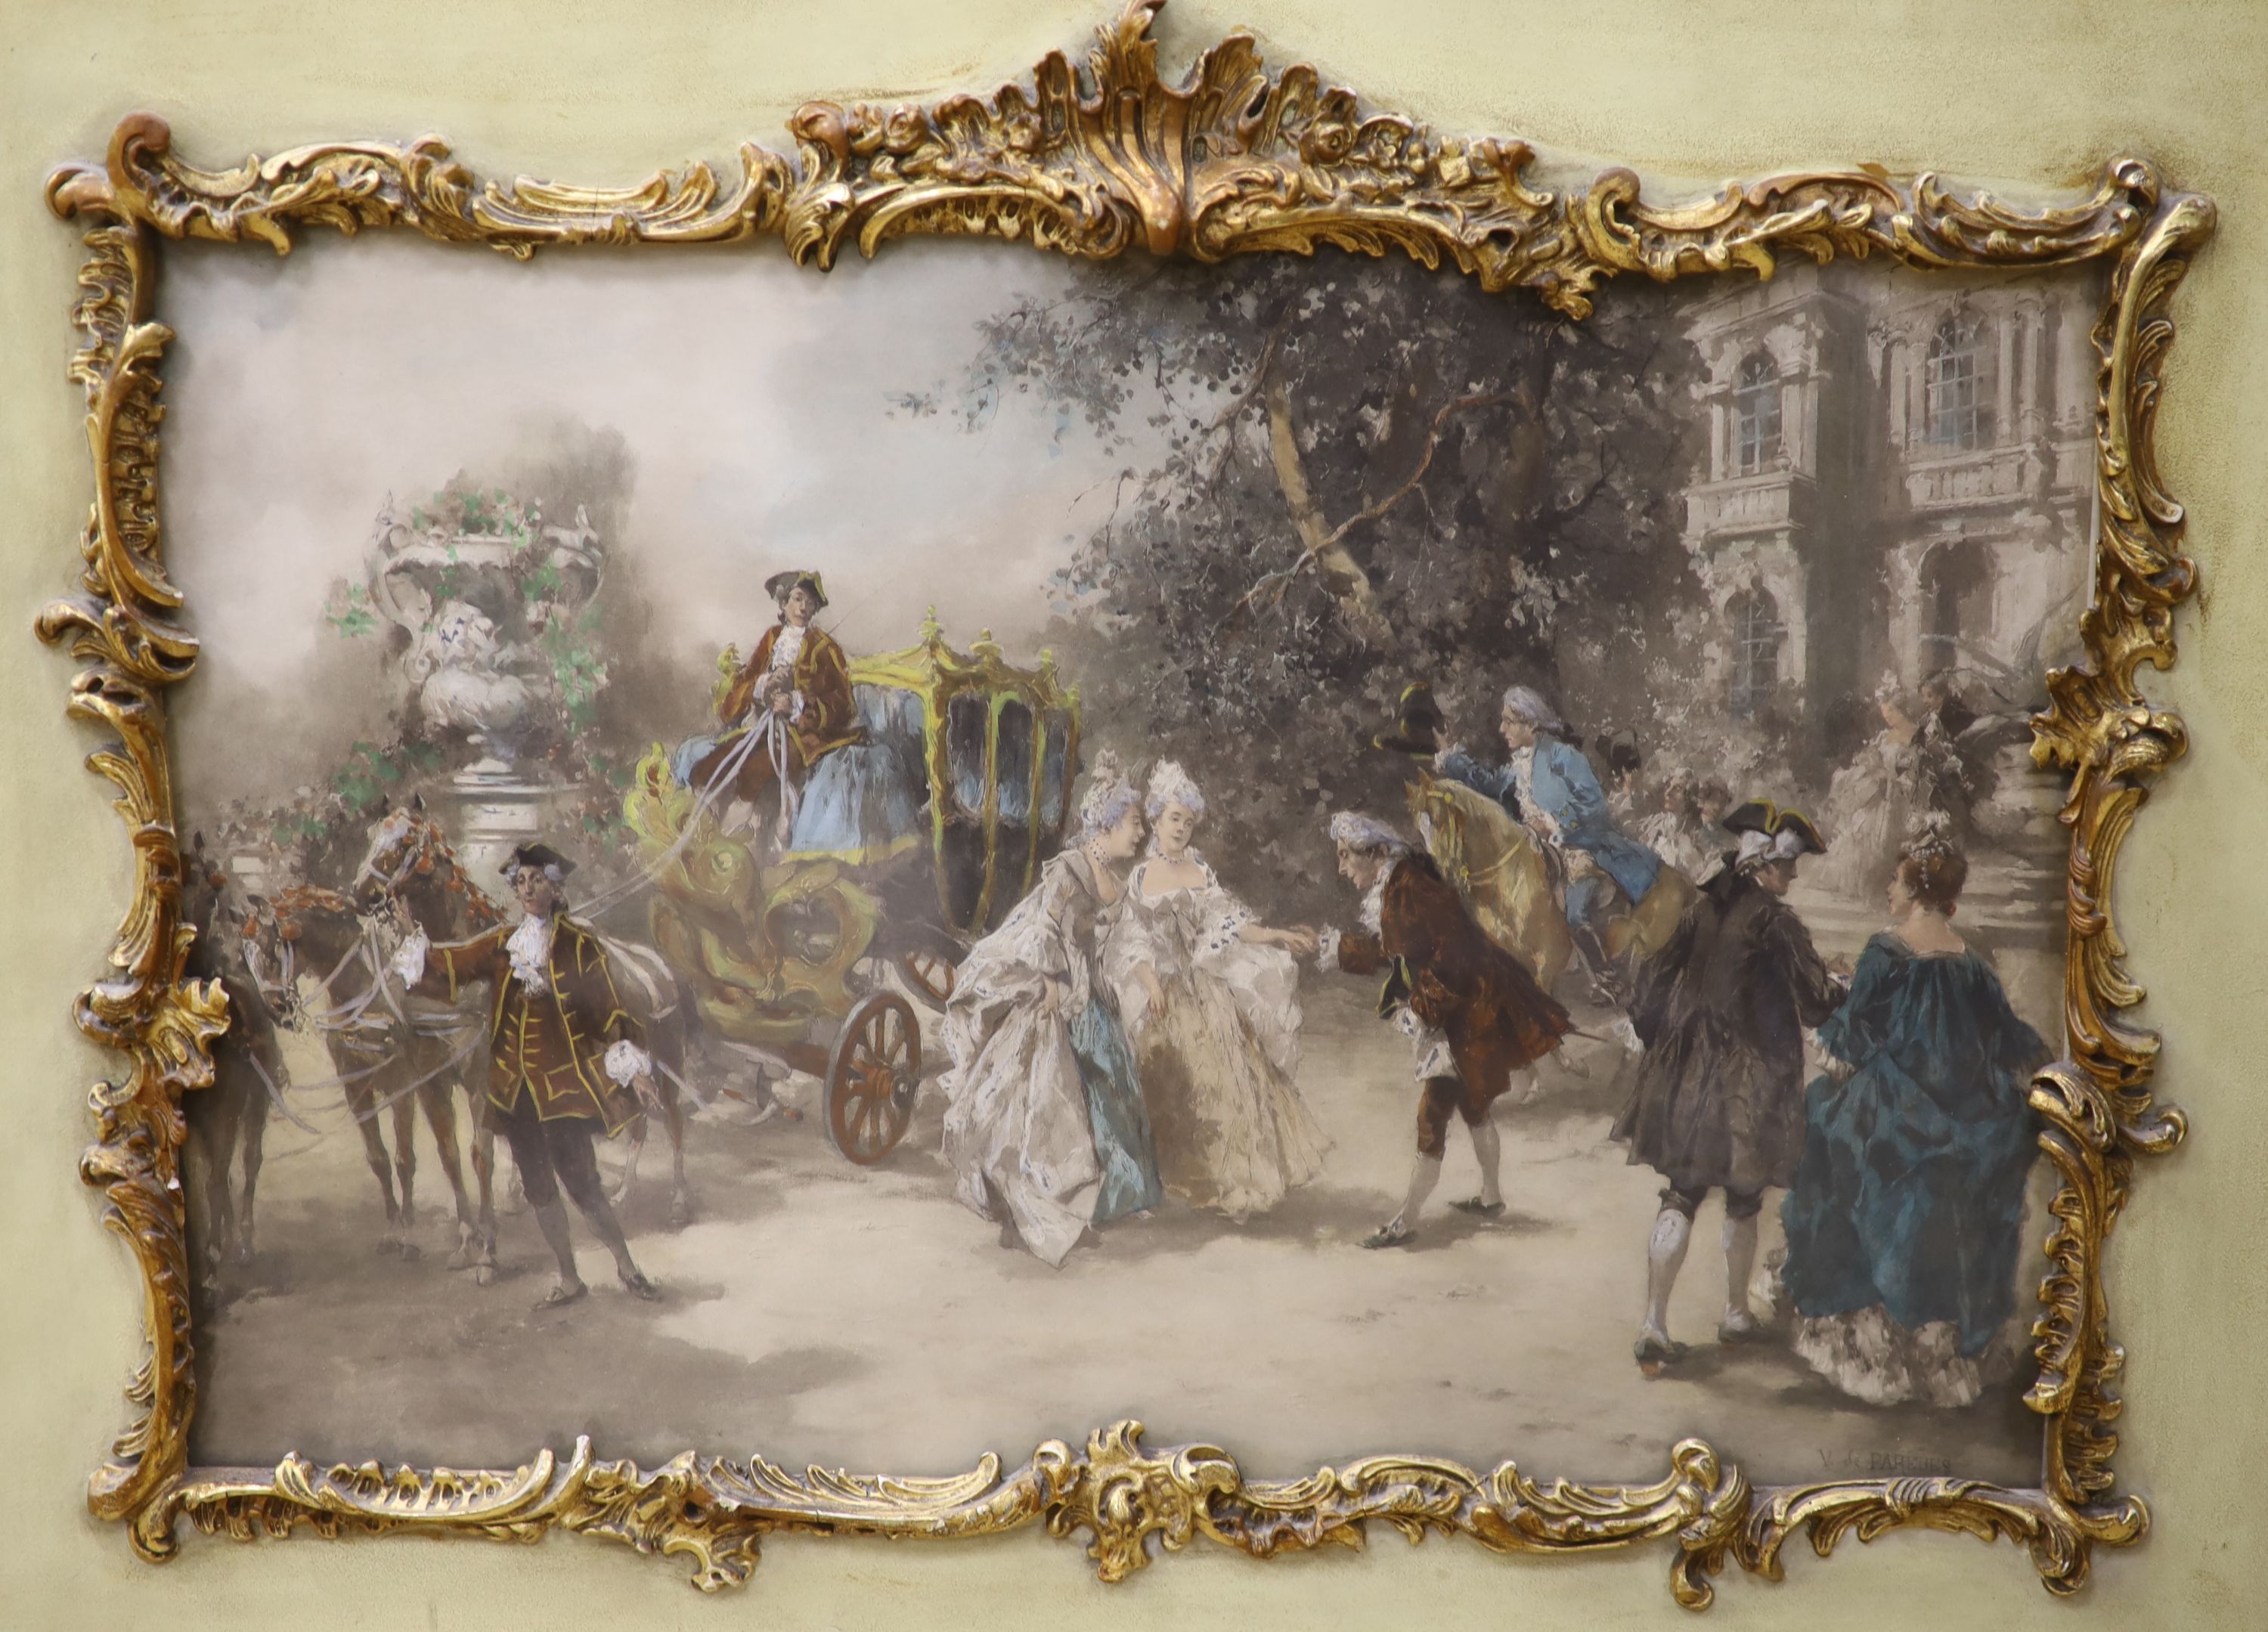 After Vincente Paredes, hand tinted lithograph, Figures outside a chateau, 32 x 49cm, ornate scroll frame